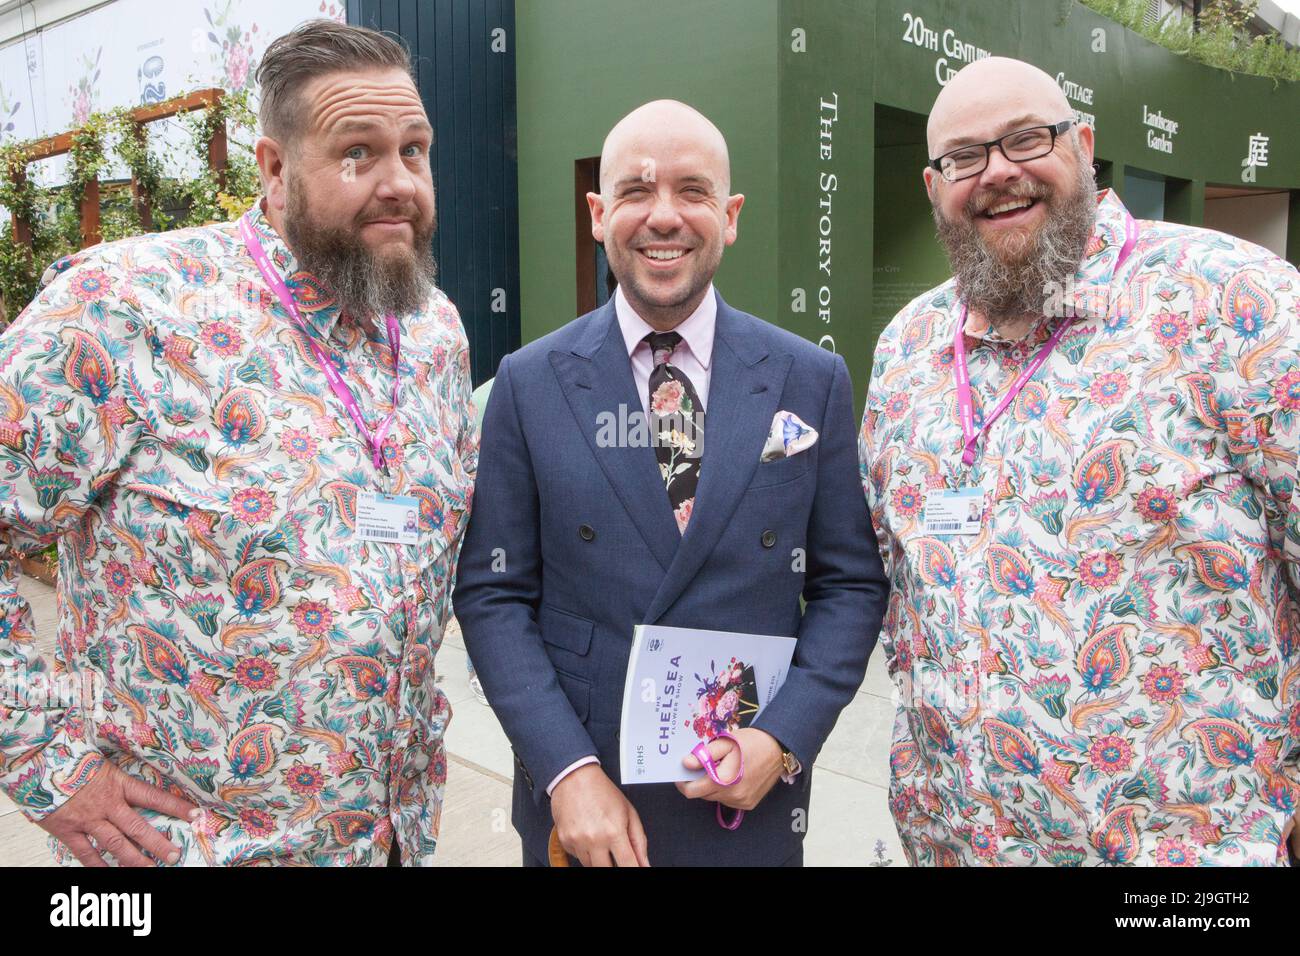 London, UK, 23 May 2022: Preview day at the Chelsea Flower Show. Comedian Tom Allen finds himself sandwiched bwetween the Bearded Growers radio presenters, Chris Bishop and John Jordon. Anna WAtson/Alamy Live News Stock Photo